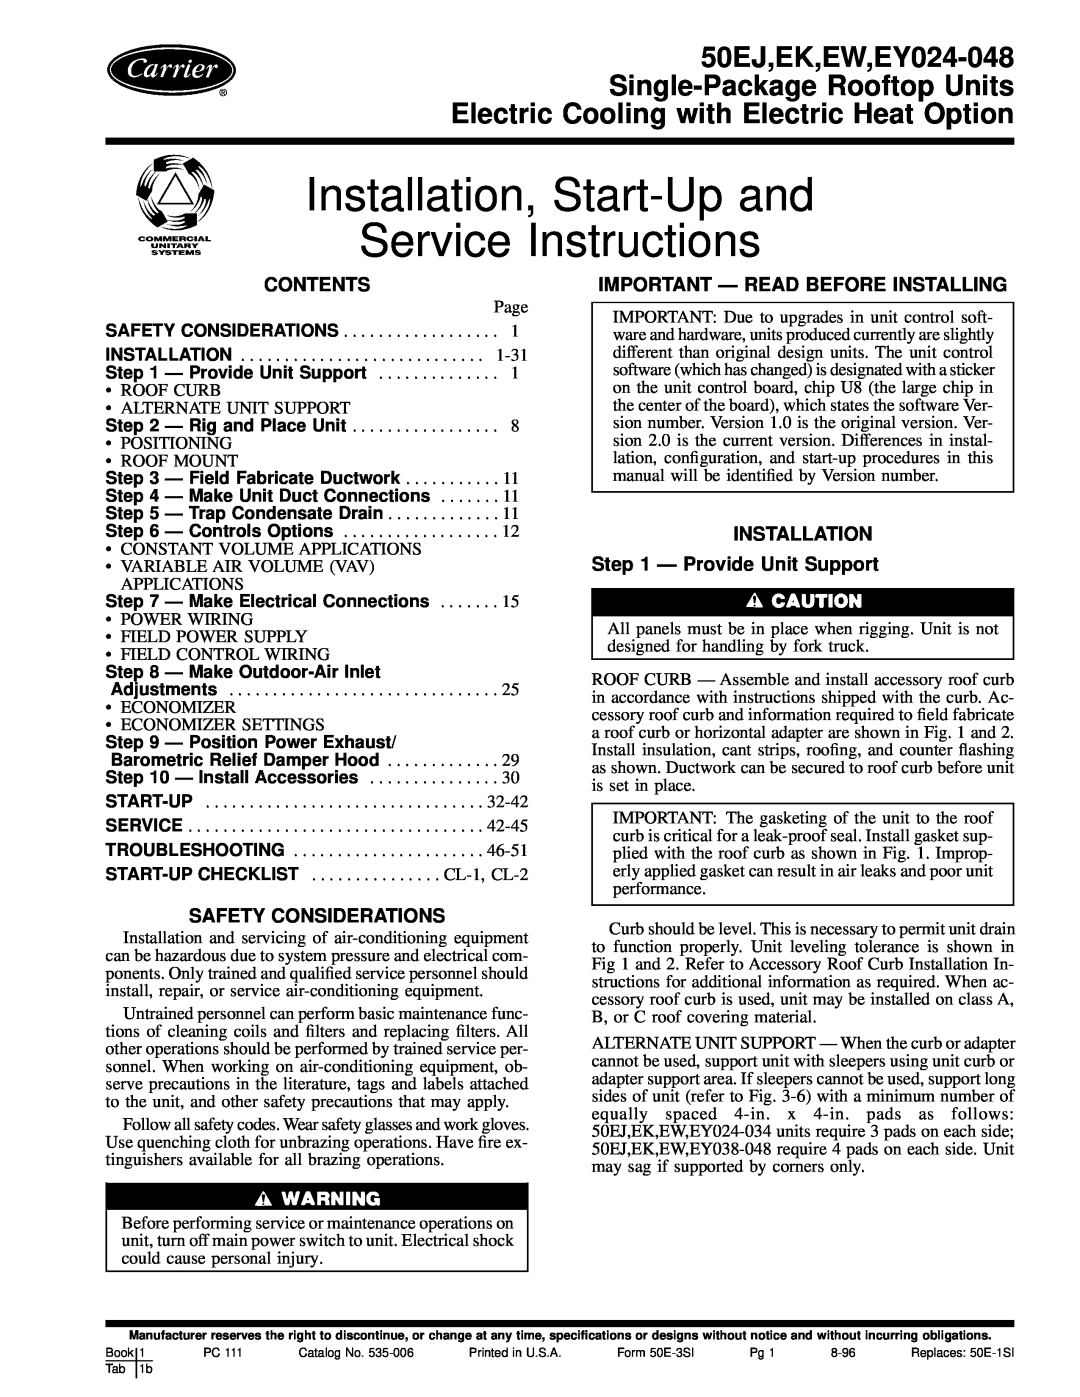 Carrier 50EW installation instructions Contents, Important Ð Read Before Installing, INSTALLATION Ð Provide Unit Support 